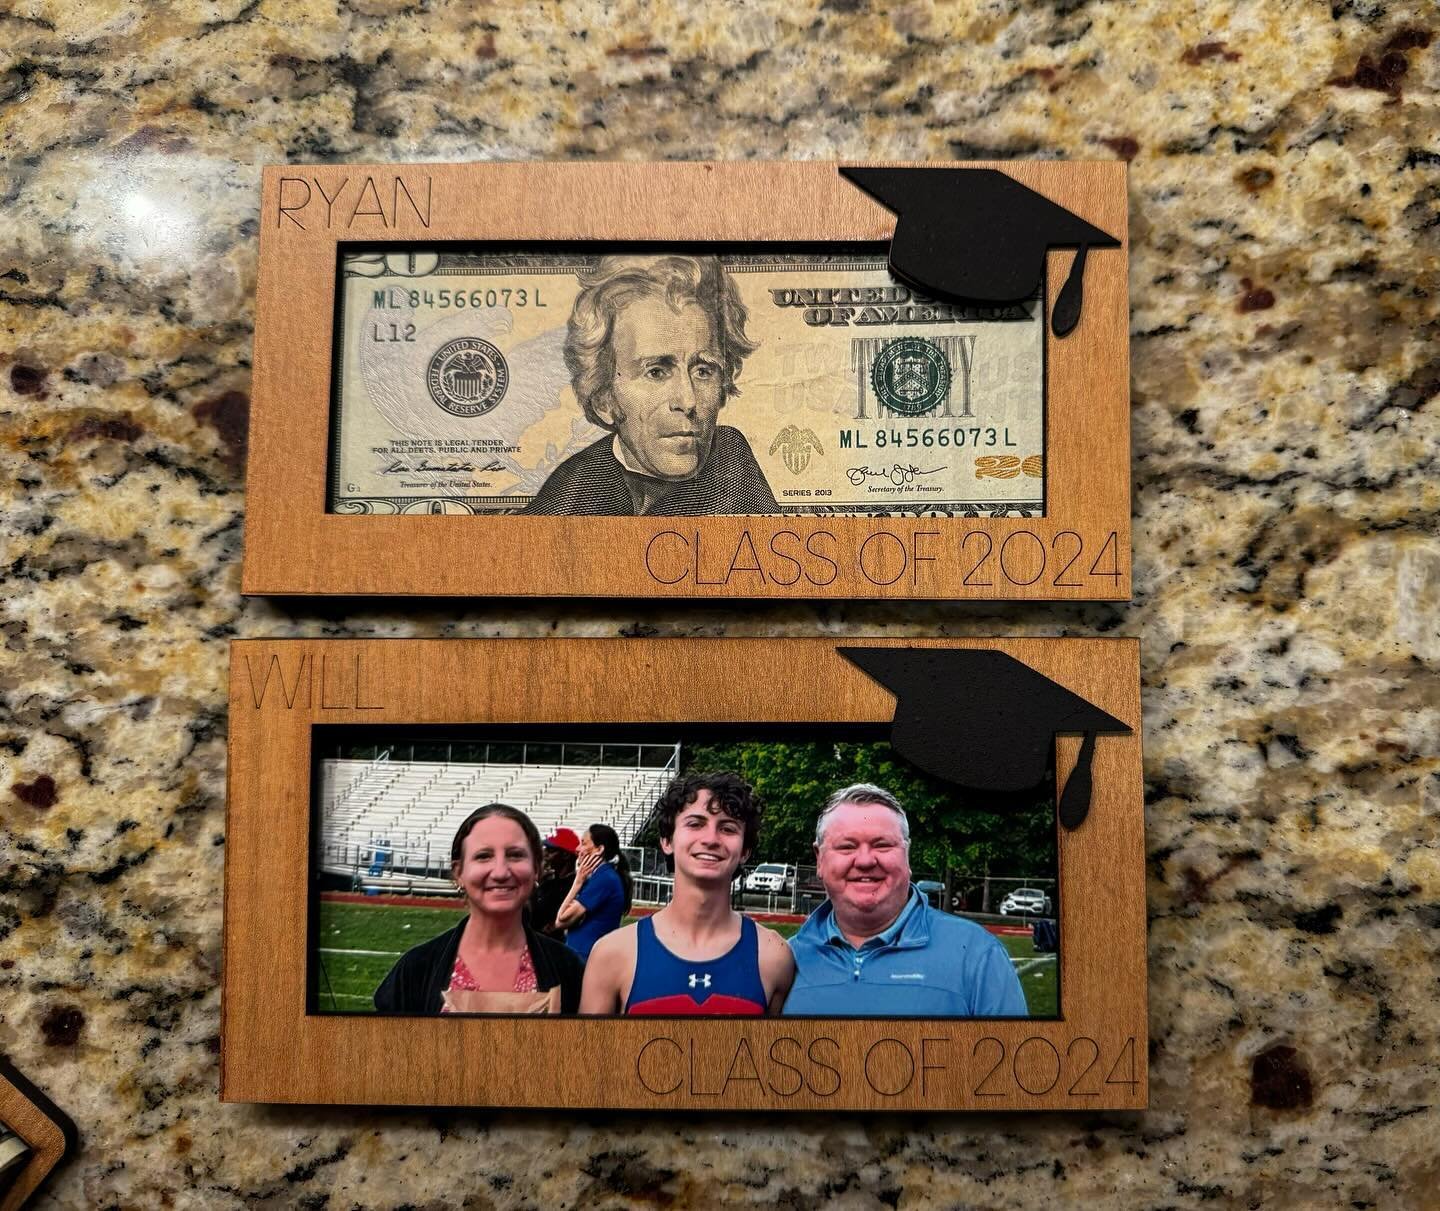 Loving this idea. You can gift money and it can be reused as a frame. Boom. $20 or two or more $15 each.